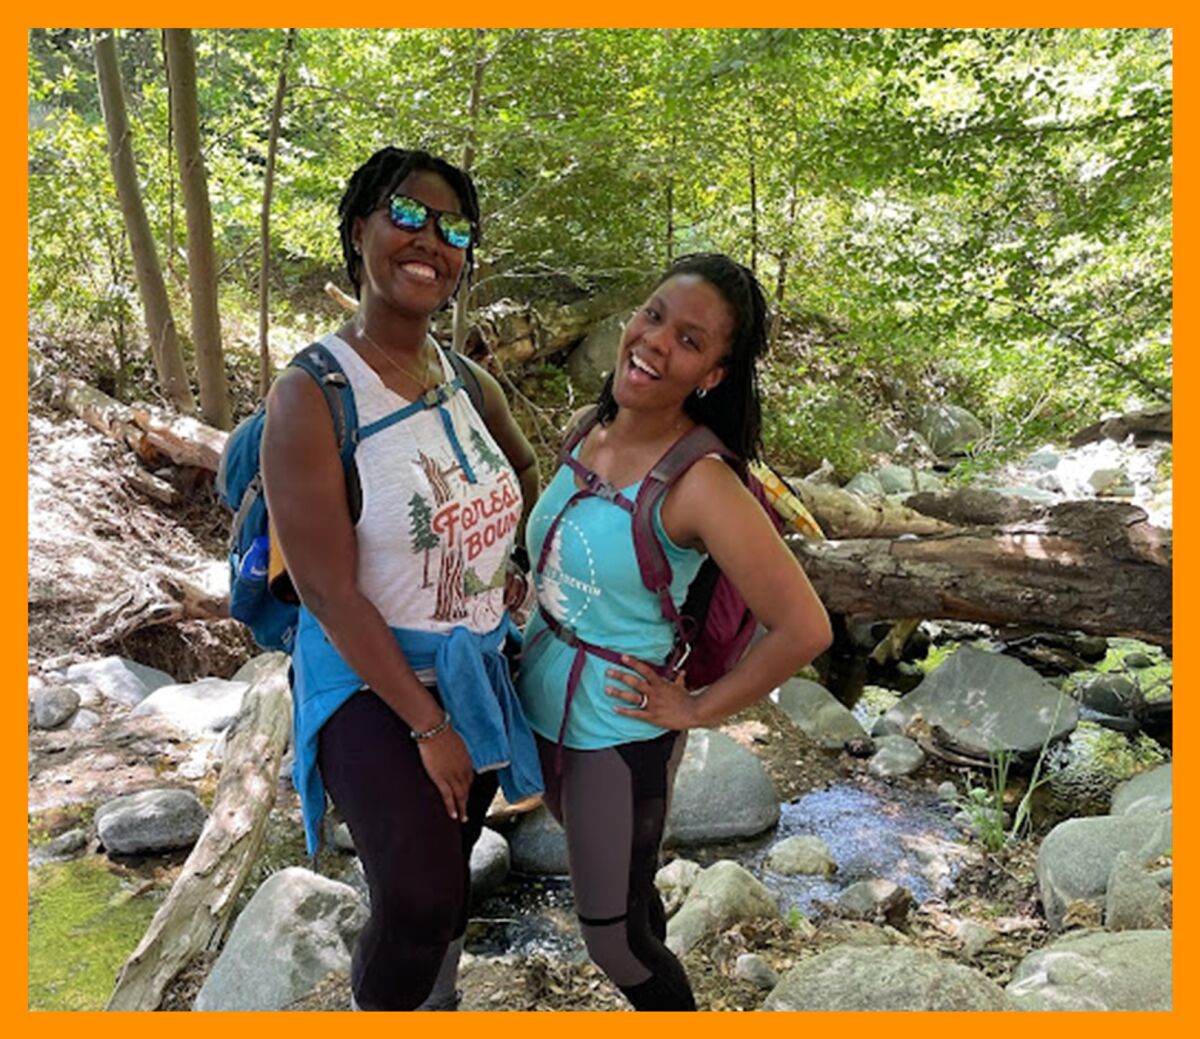 Two Black women, Tiffany Tharpe and Michelle Warren, stand next to each other in front of a rocky forested area.